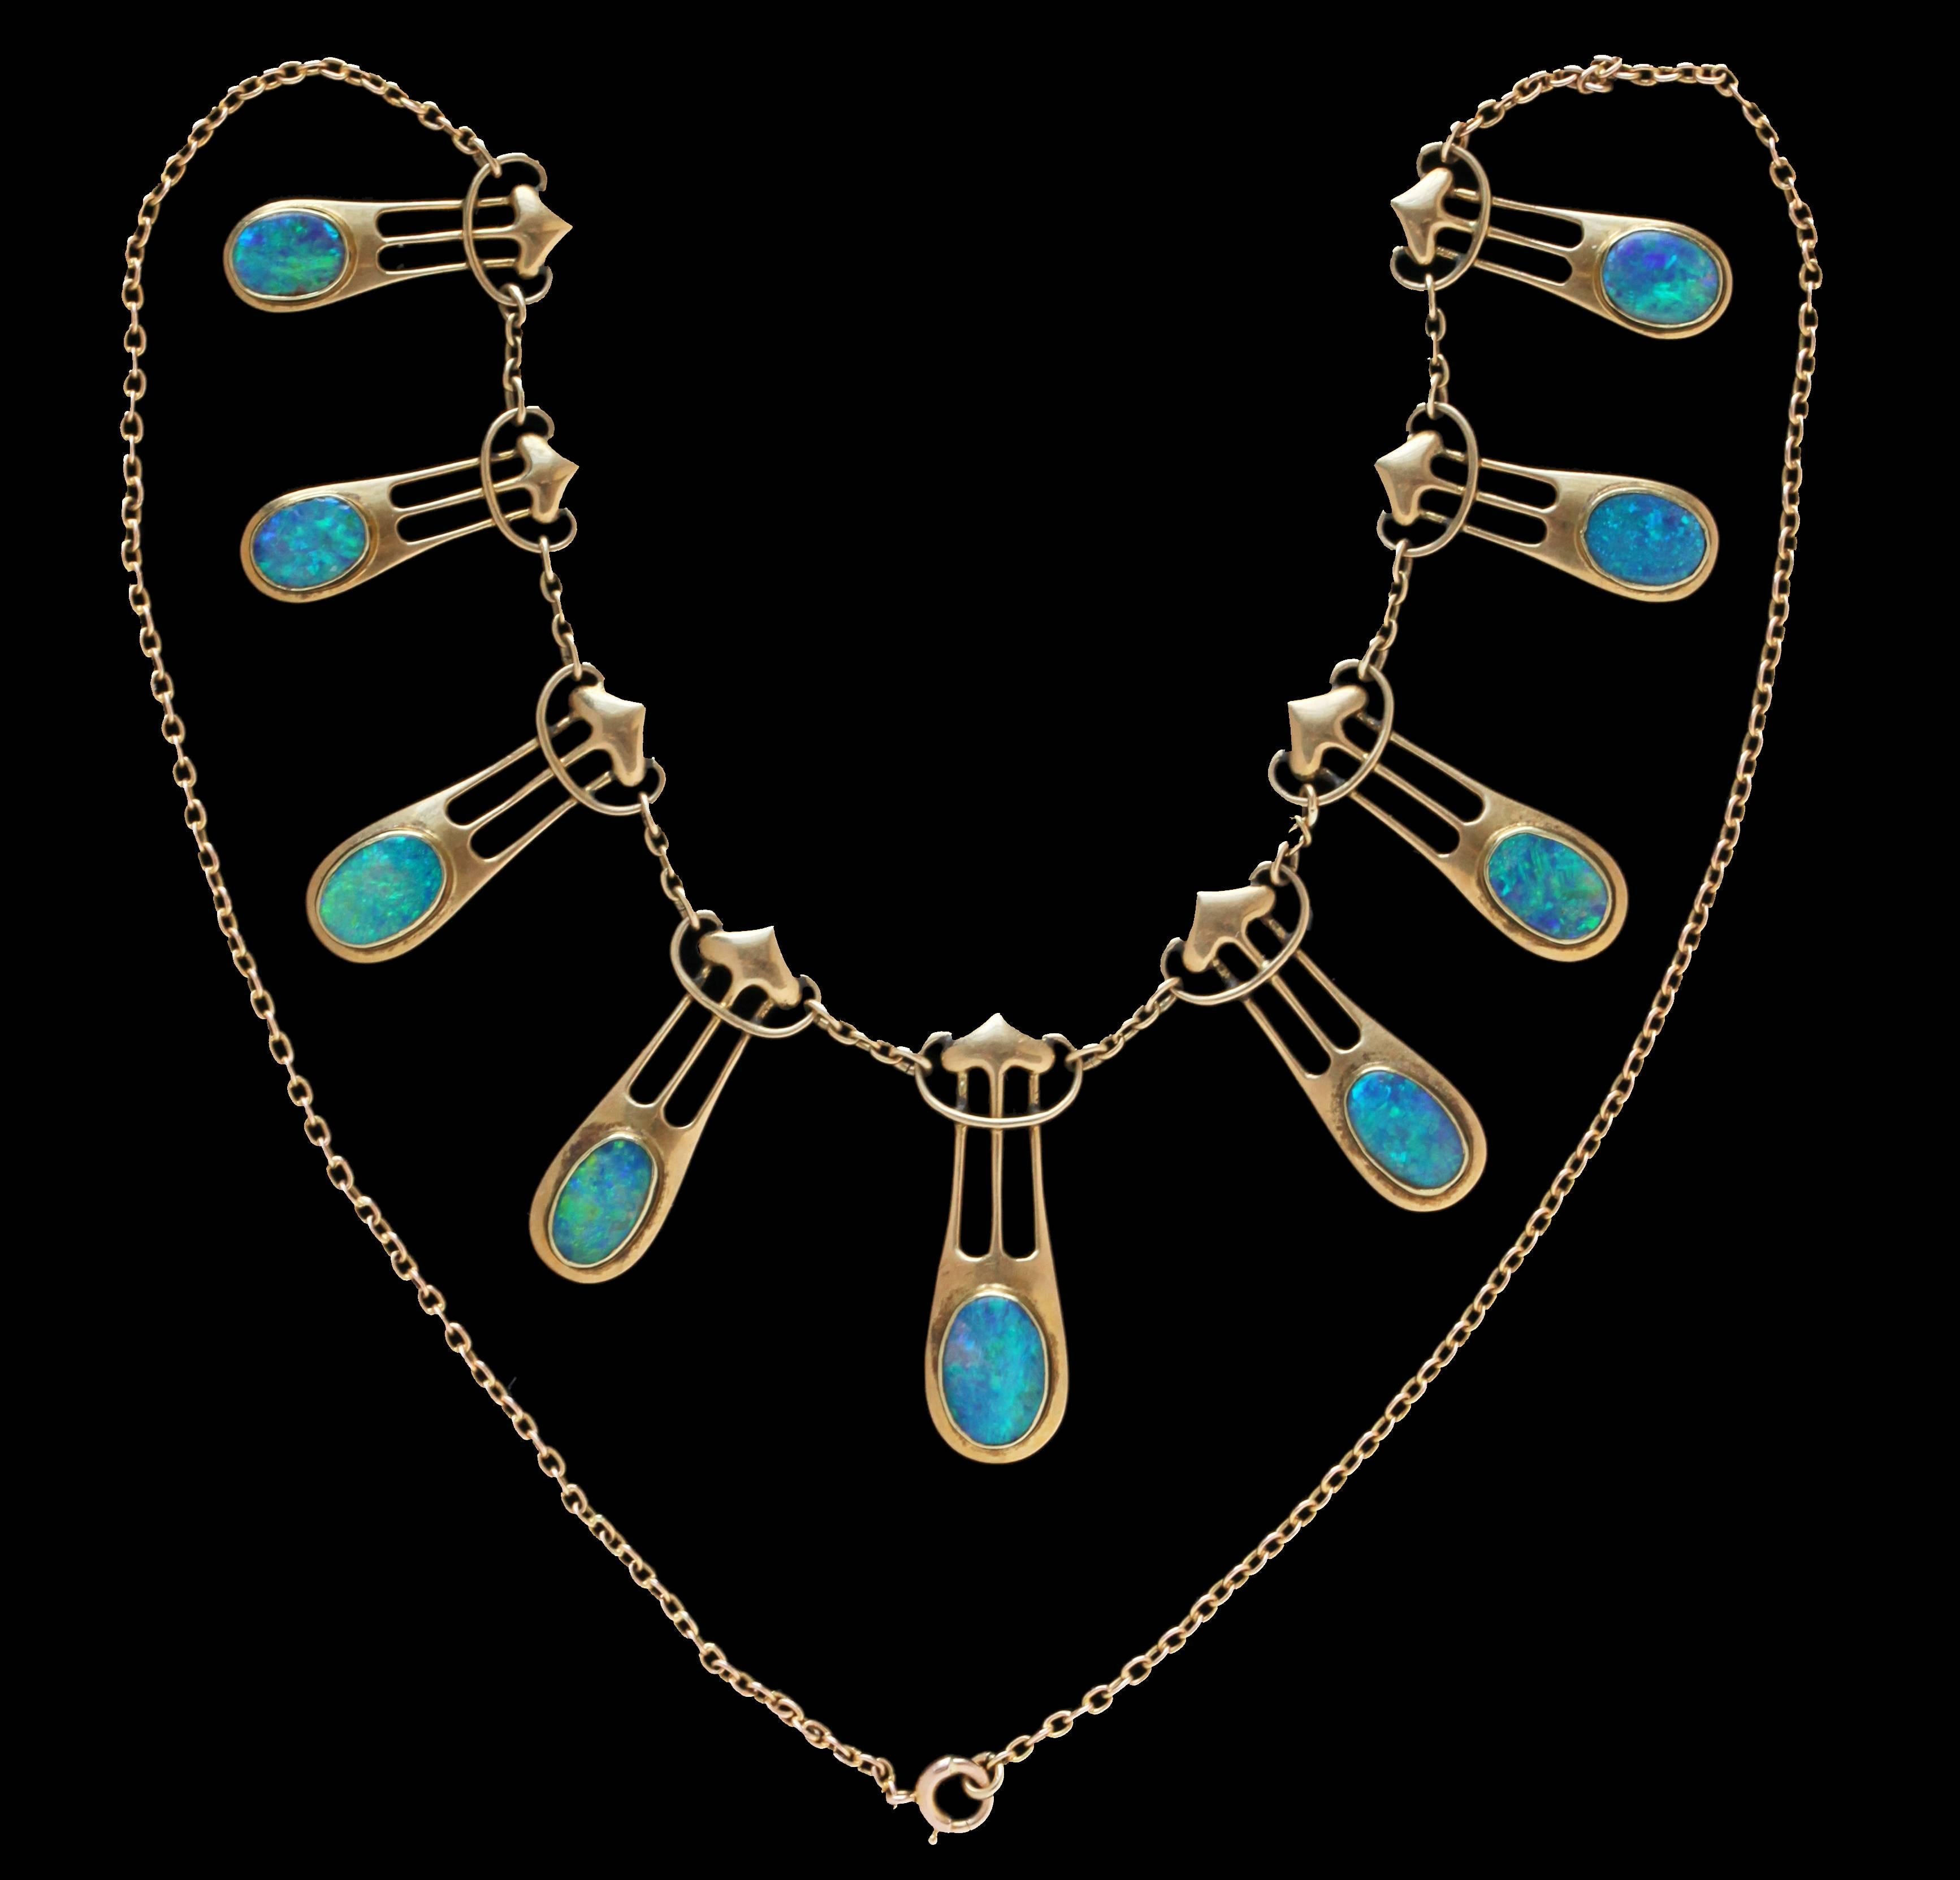 Beautiful Art Nouveau Necklace with perfectly matched superb opals
 H  2.87 cm (1.13 in)    L  46.50 cm (18.31 in)
Origin 	United Kingdom, c. 1900
Marks 	'MBC' monogram & '15ct'
Condition  Very good	
Weight 	14.00 Grams 
